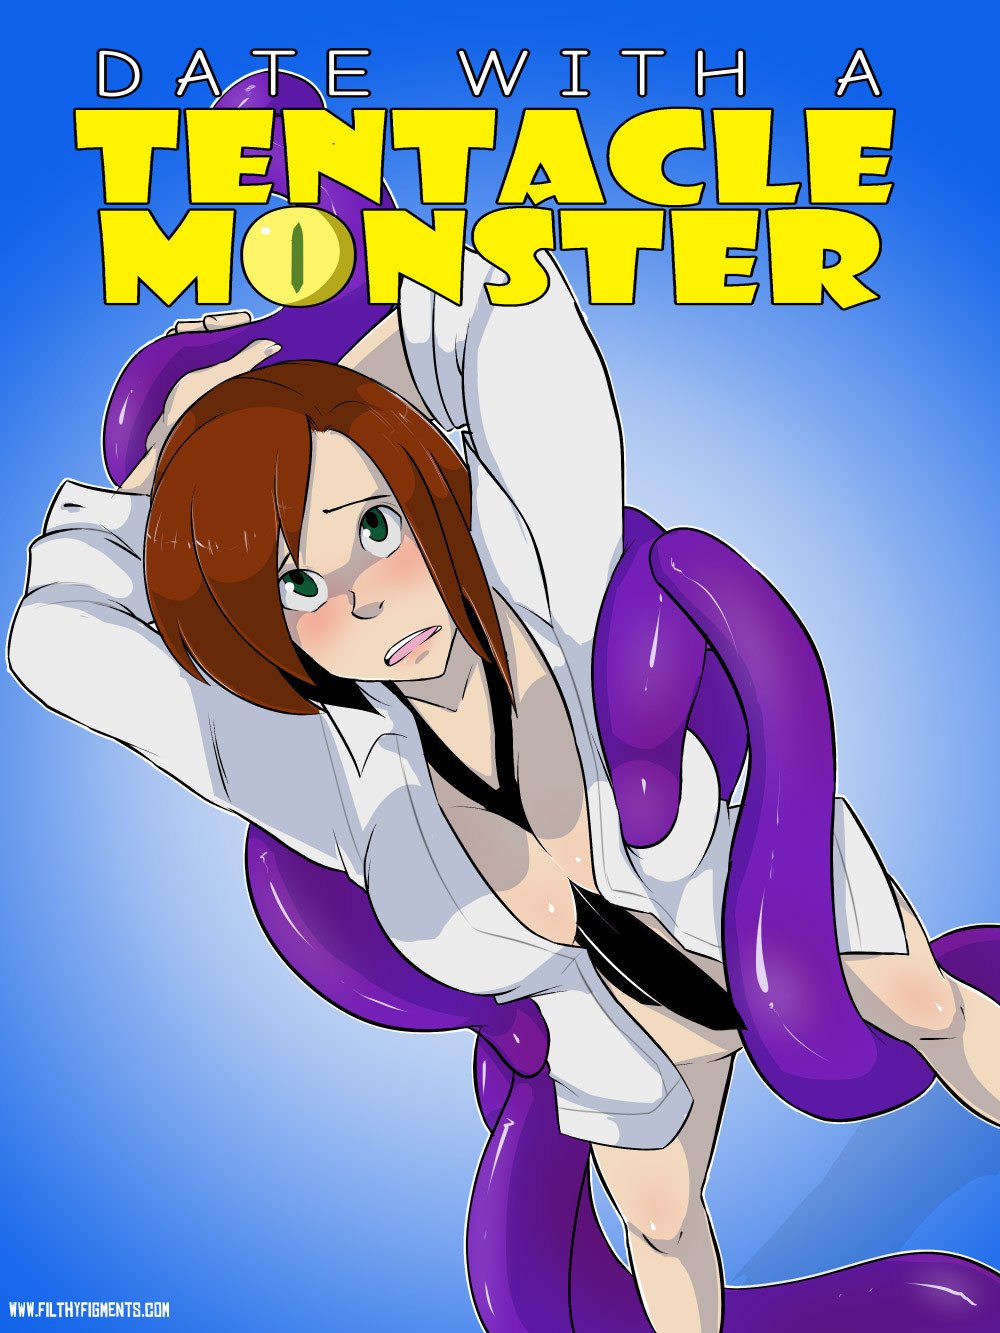 Porn Tentacle Monster - Filthy Figments â€” Date with a Tentacle Monster has launched ...